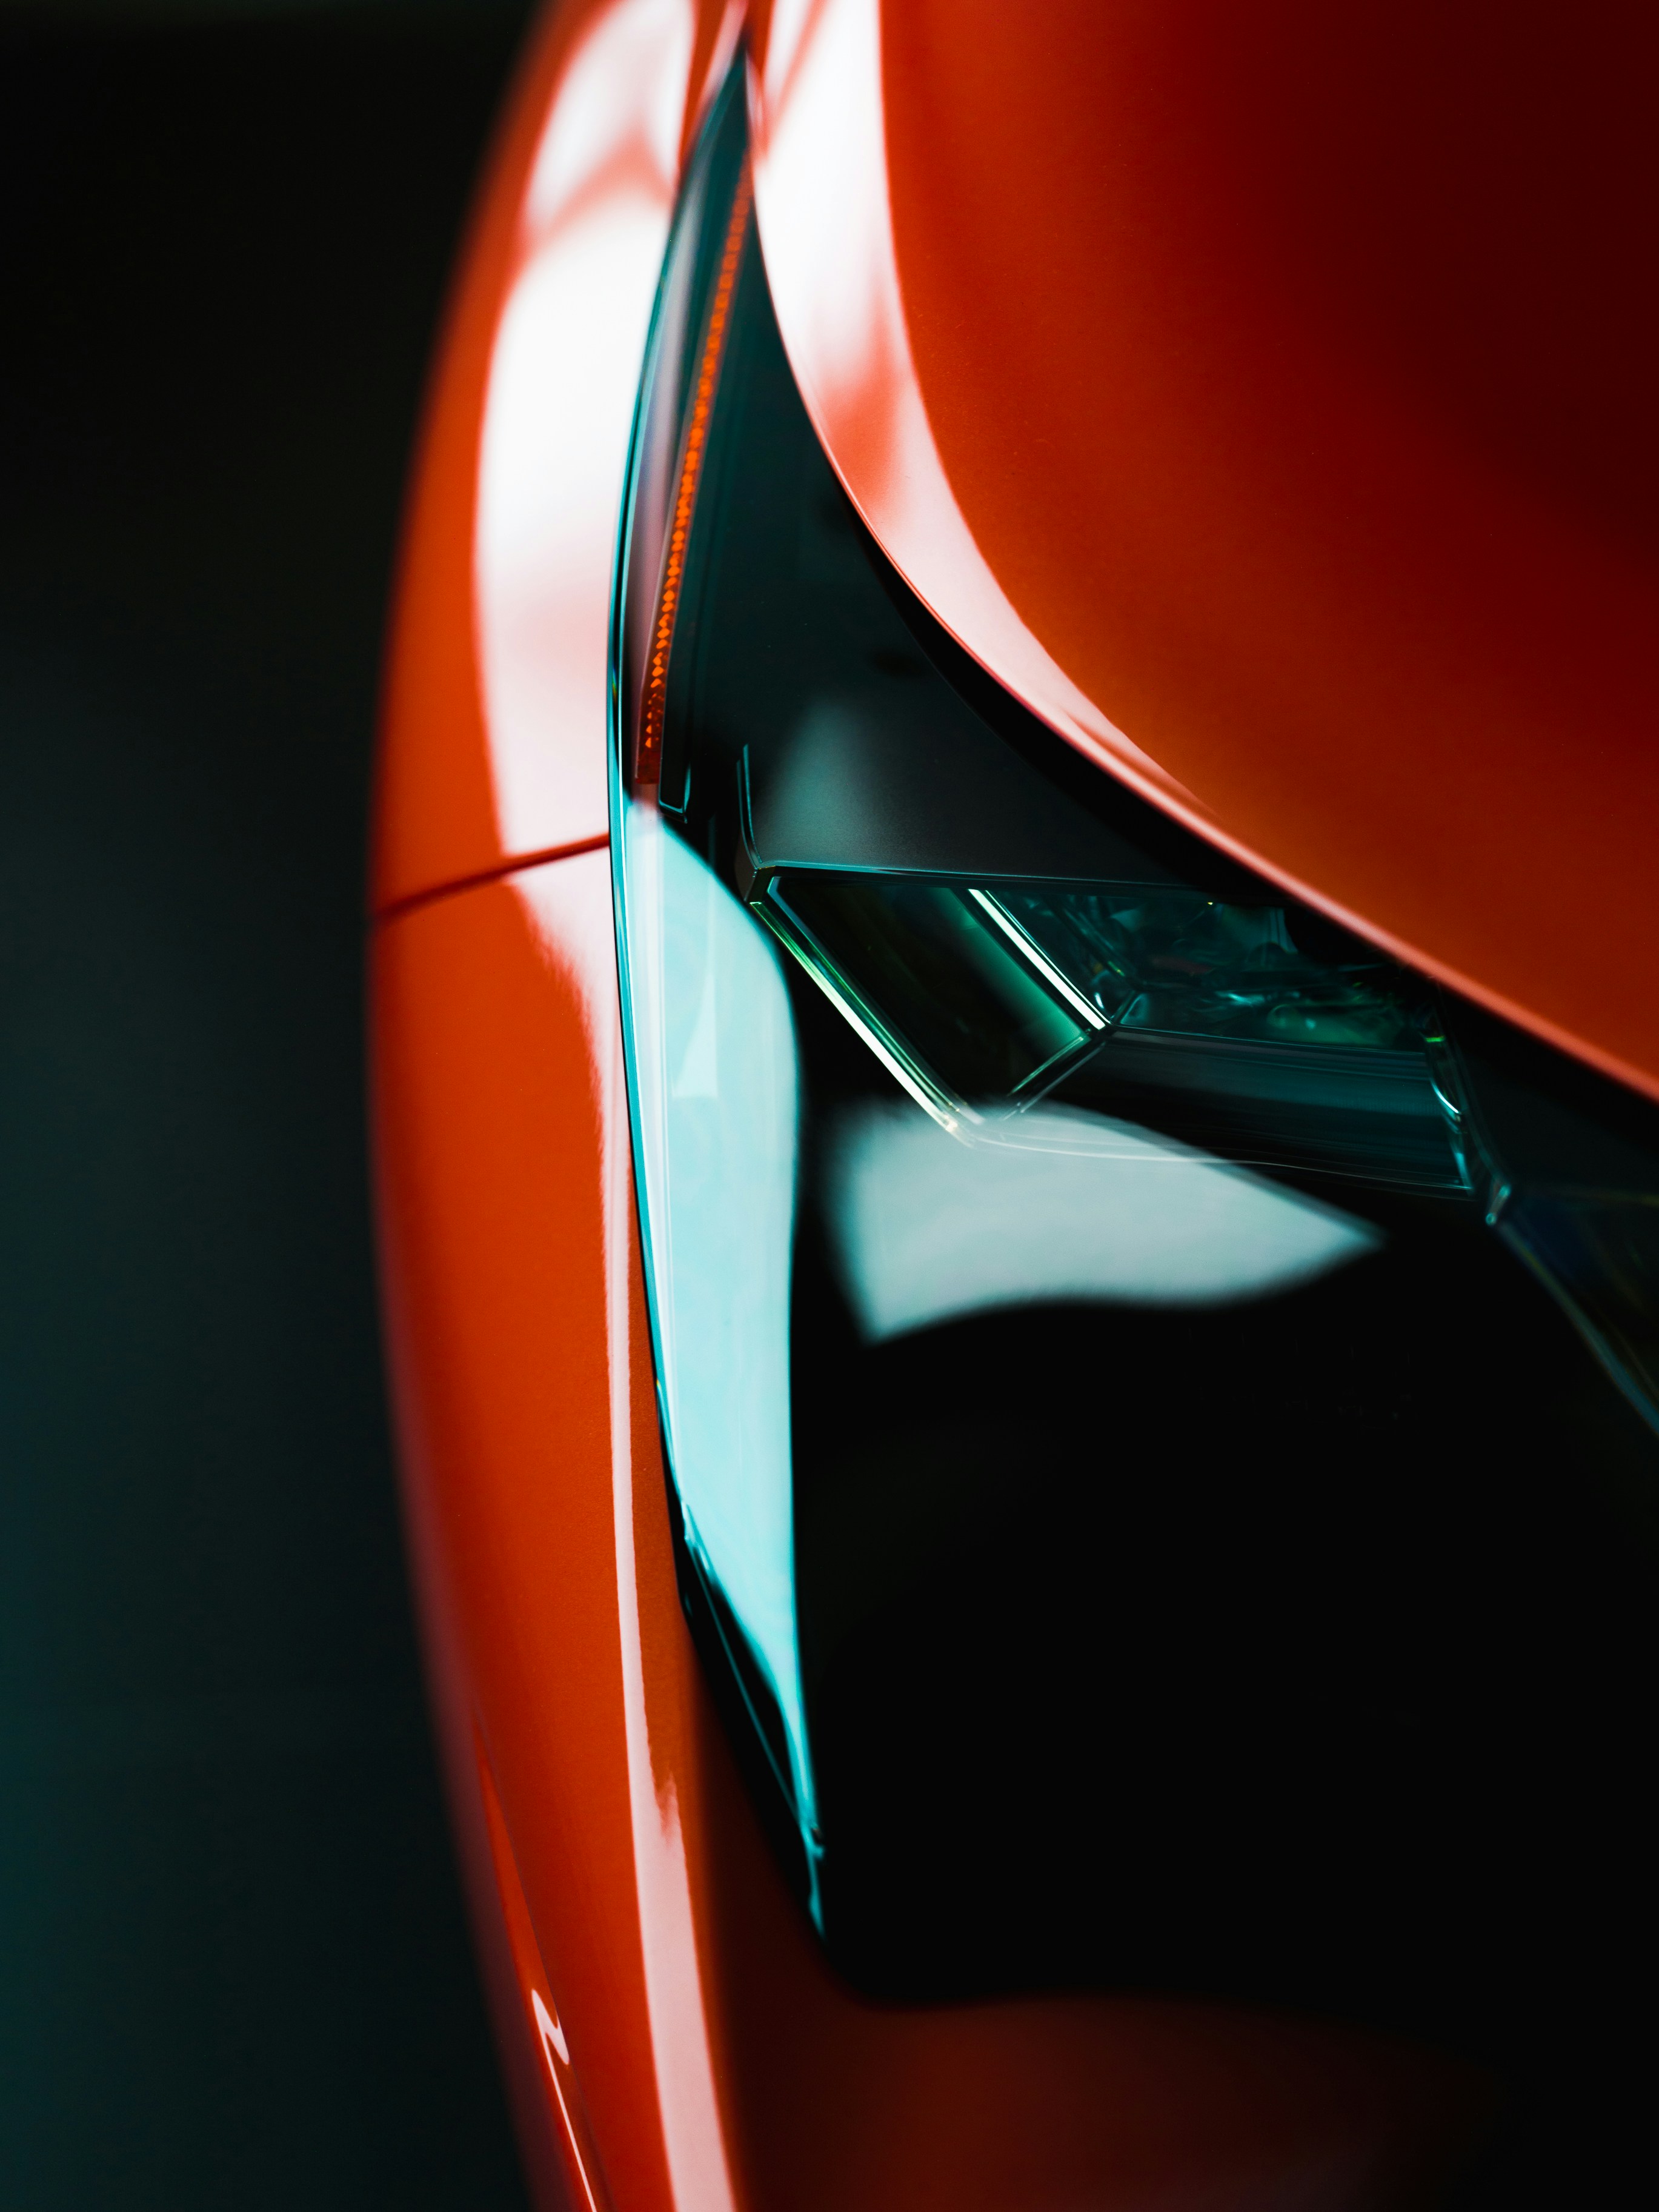 Lexus NX studio shot / 2017 Like my photographs and want to see more at Unsplash? Support me at http://artlasovsky.com/unsplash-sponsor